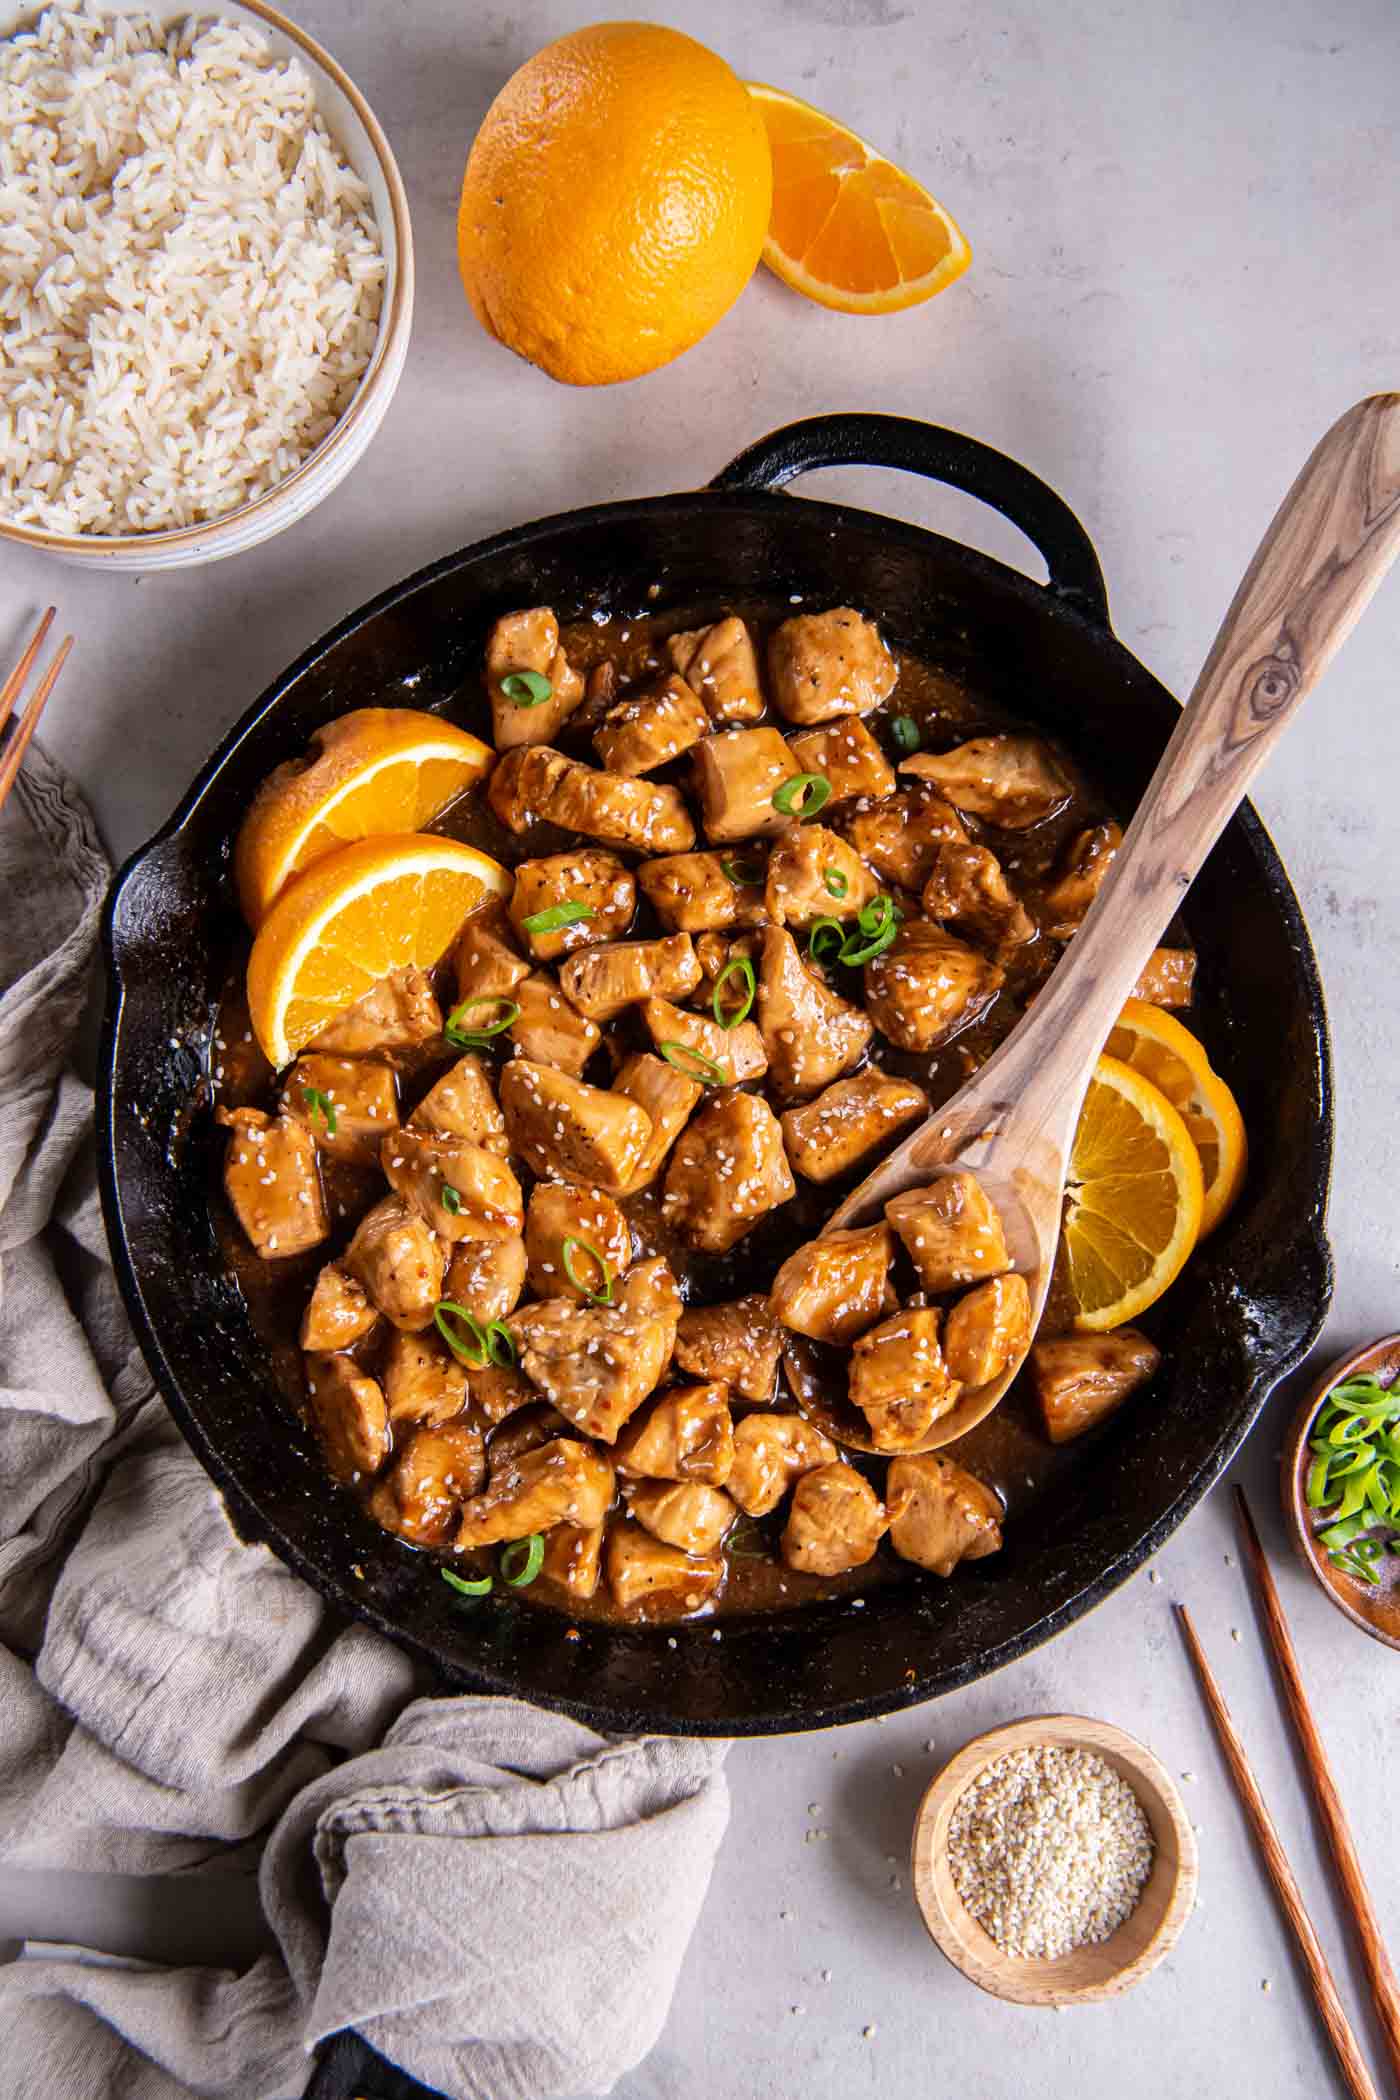 Orange chicken in a cast iron skillet with a wooden spoon with oranges, rice, sesame seeds and green onions around the skillet.